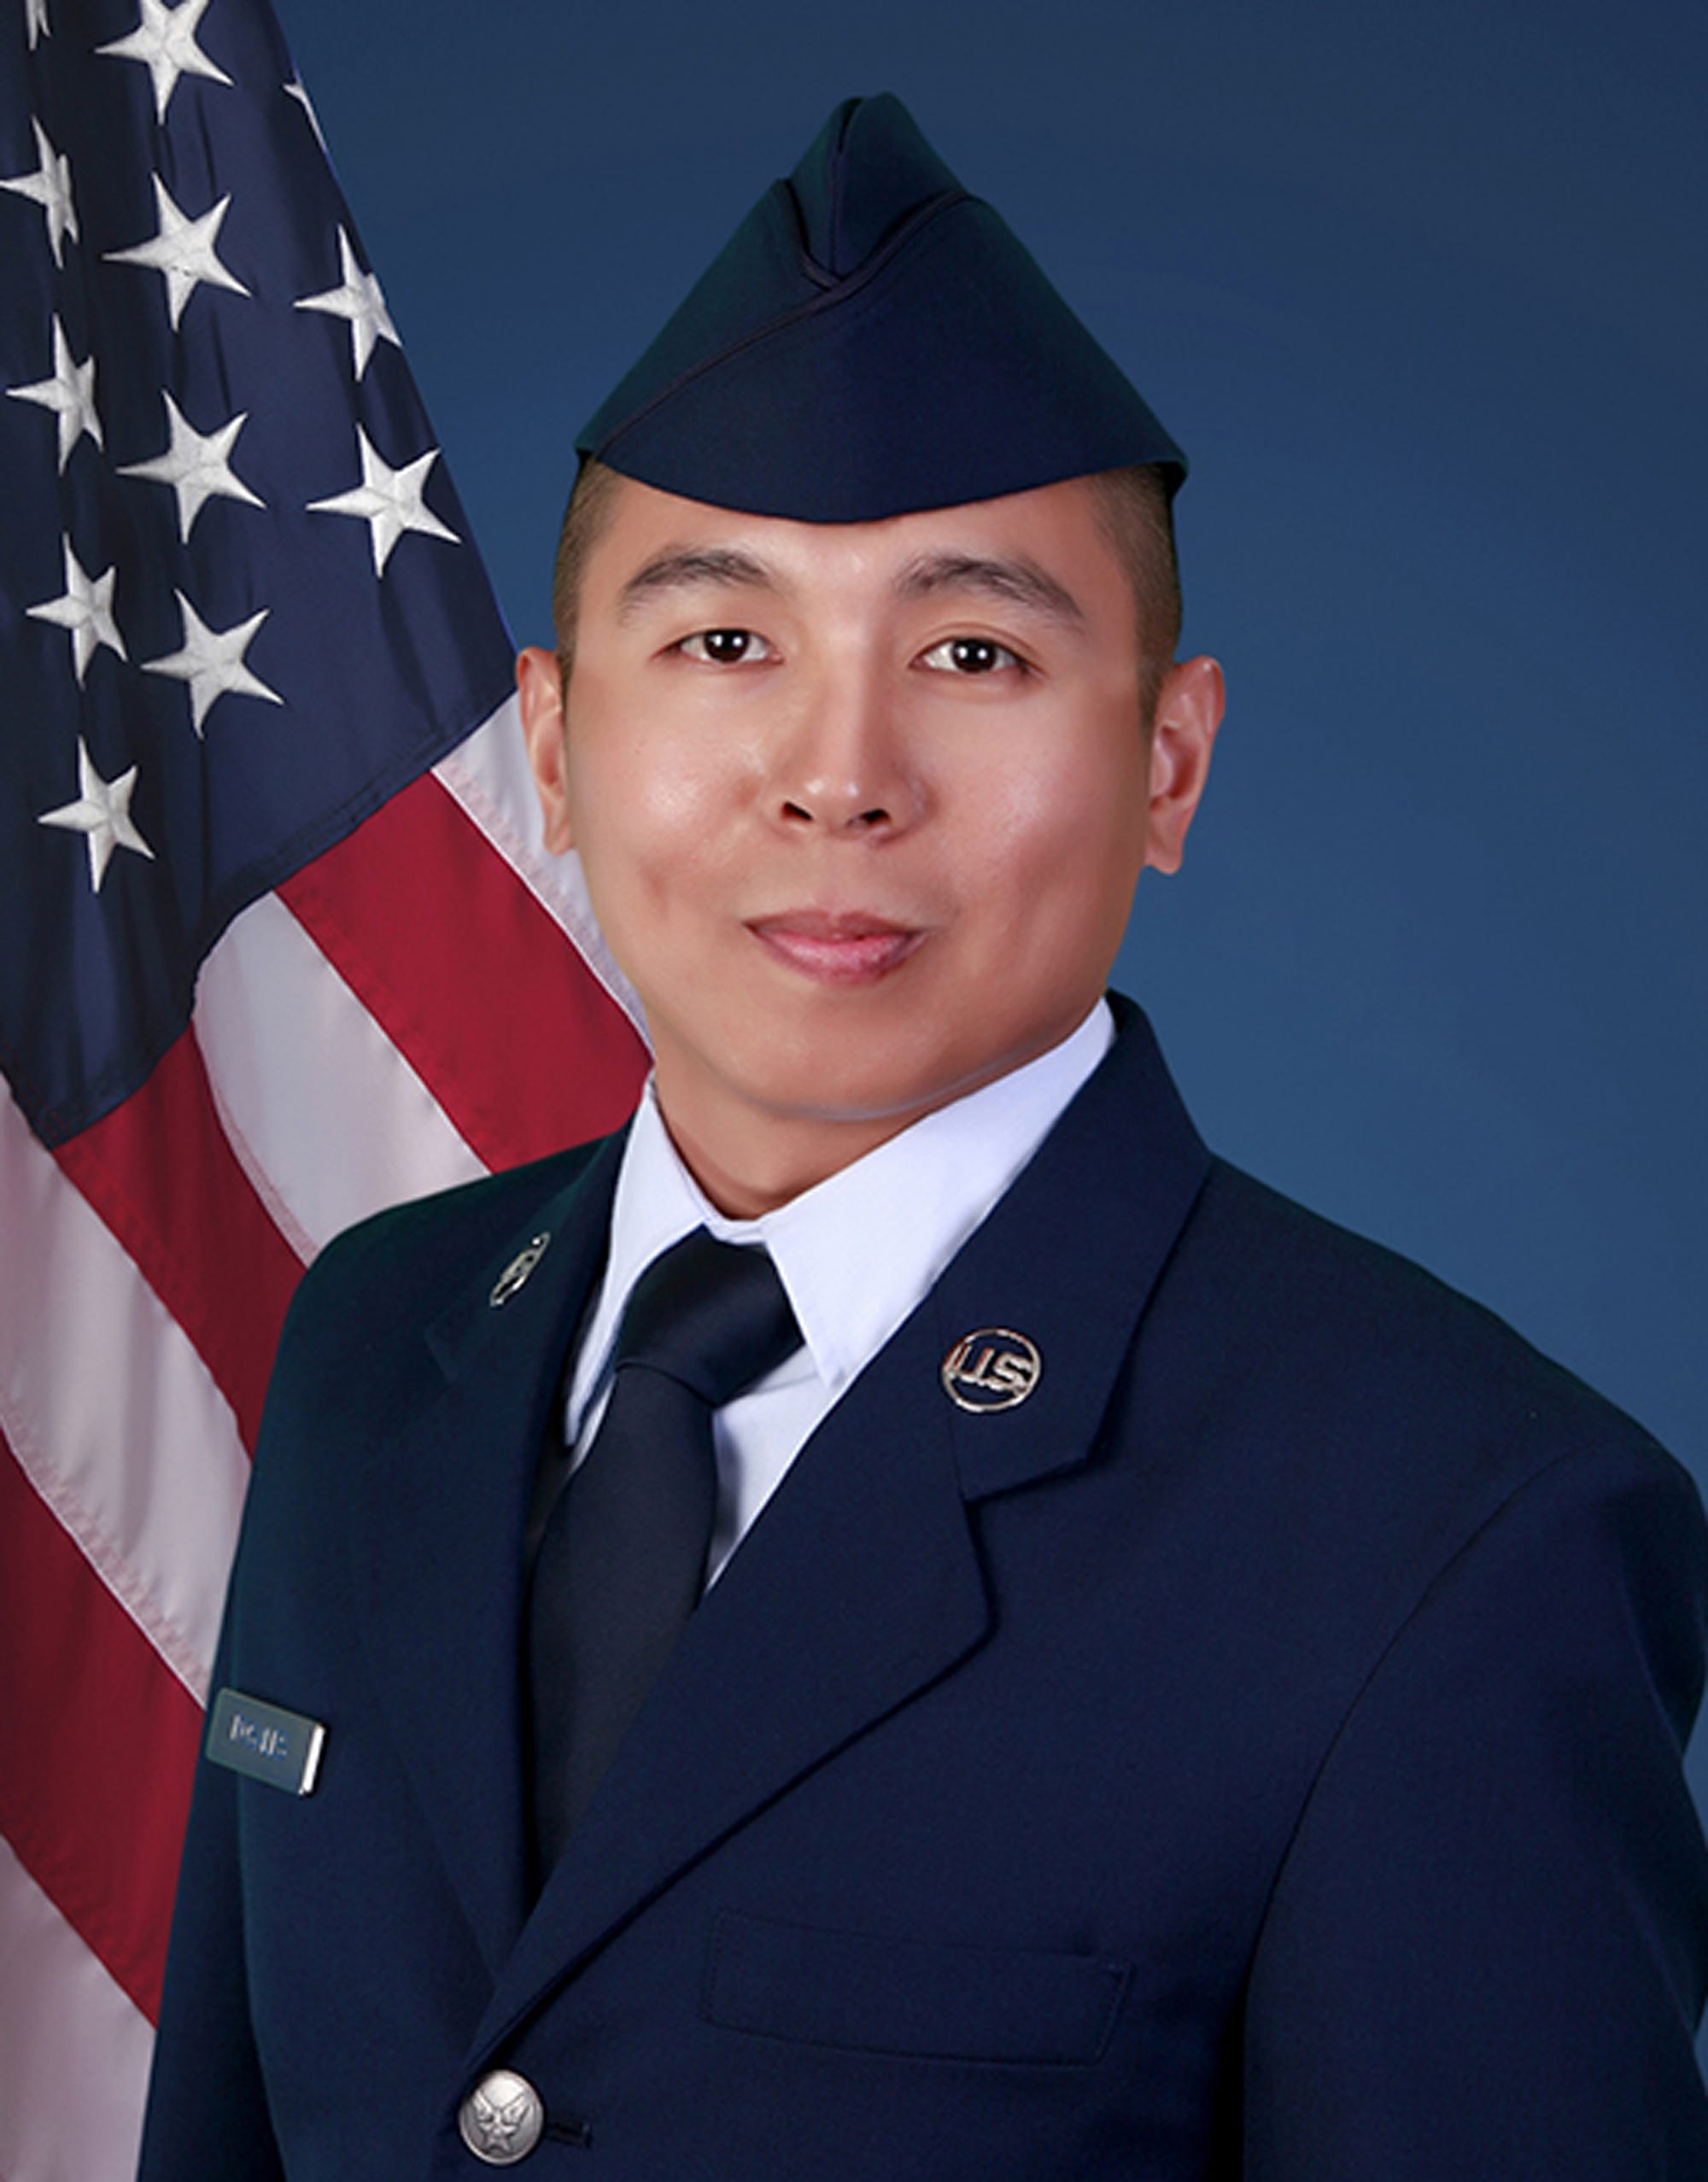 U.S. Air Force Airman 1st Class Marc L. Rosales graduated from basic military training at Joint Base San Antonio-Lackland, San Antonio, Texas. Rosales earned distinction as an honor graduate. He is the son of Kristy A. and husband of Kelvin Zenn P. Rosales of Crestview. The airman is a 2009 graduate of Crestview High School.